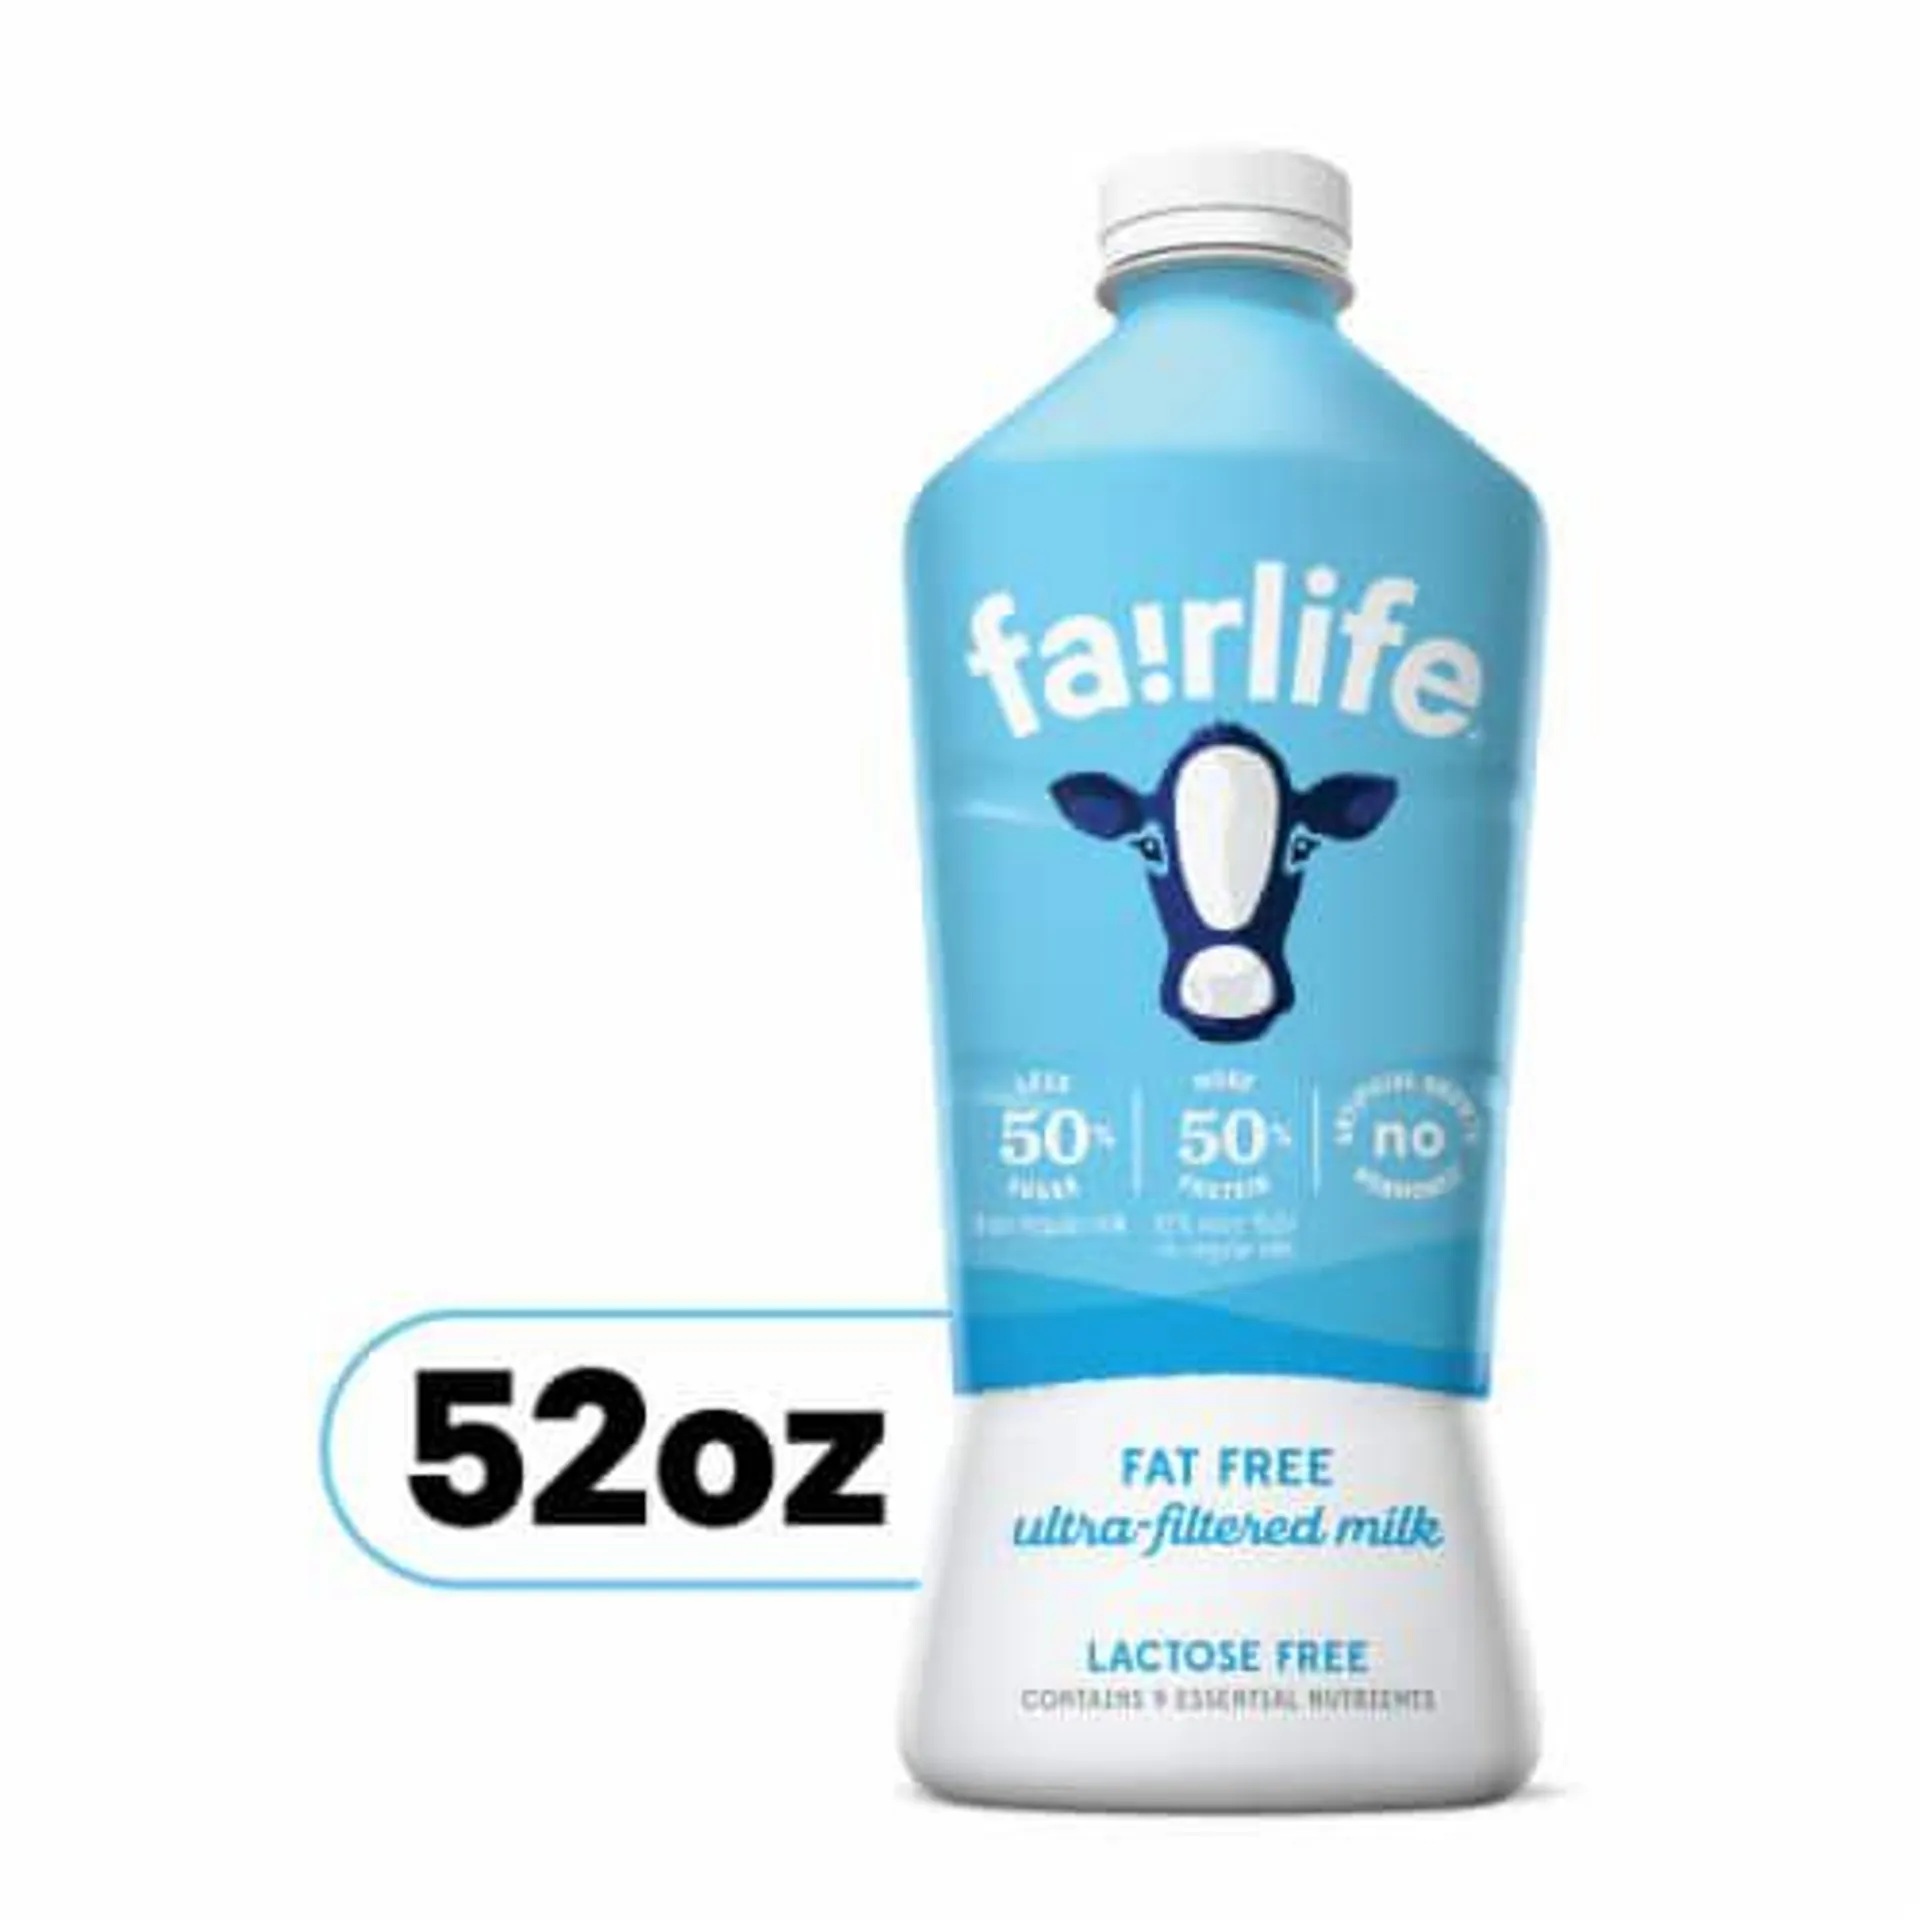 Fairlife Fat Free Ultra Filtered Lactose Free Milk